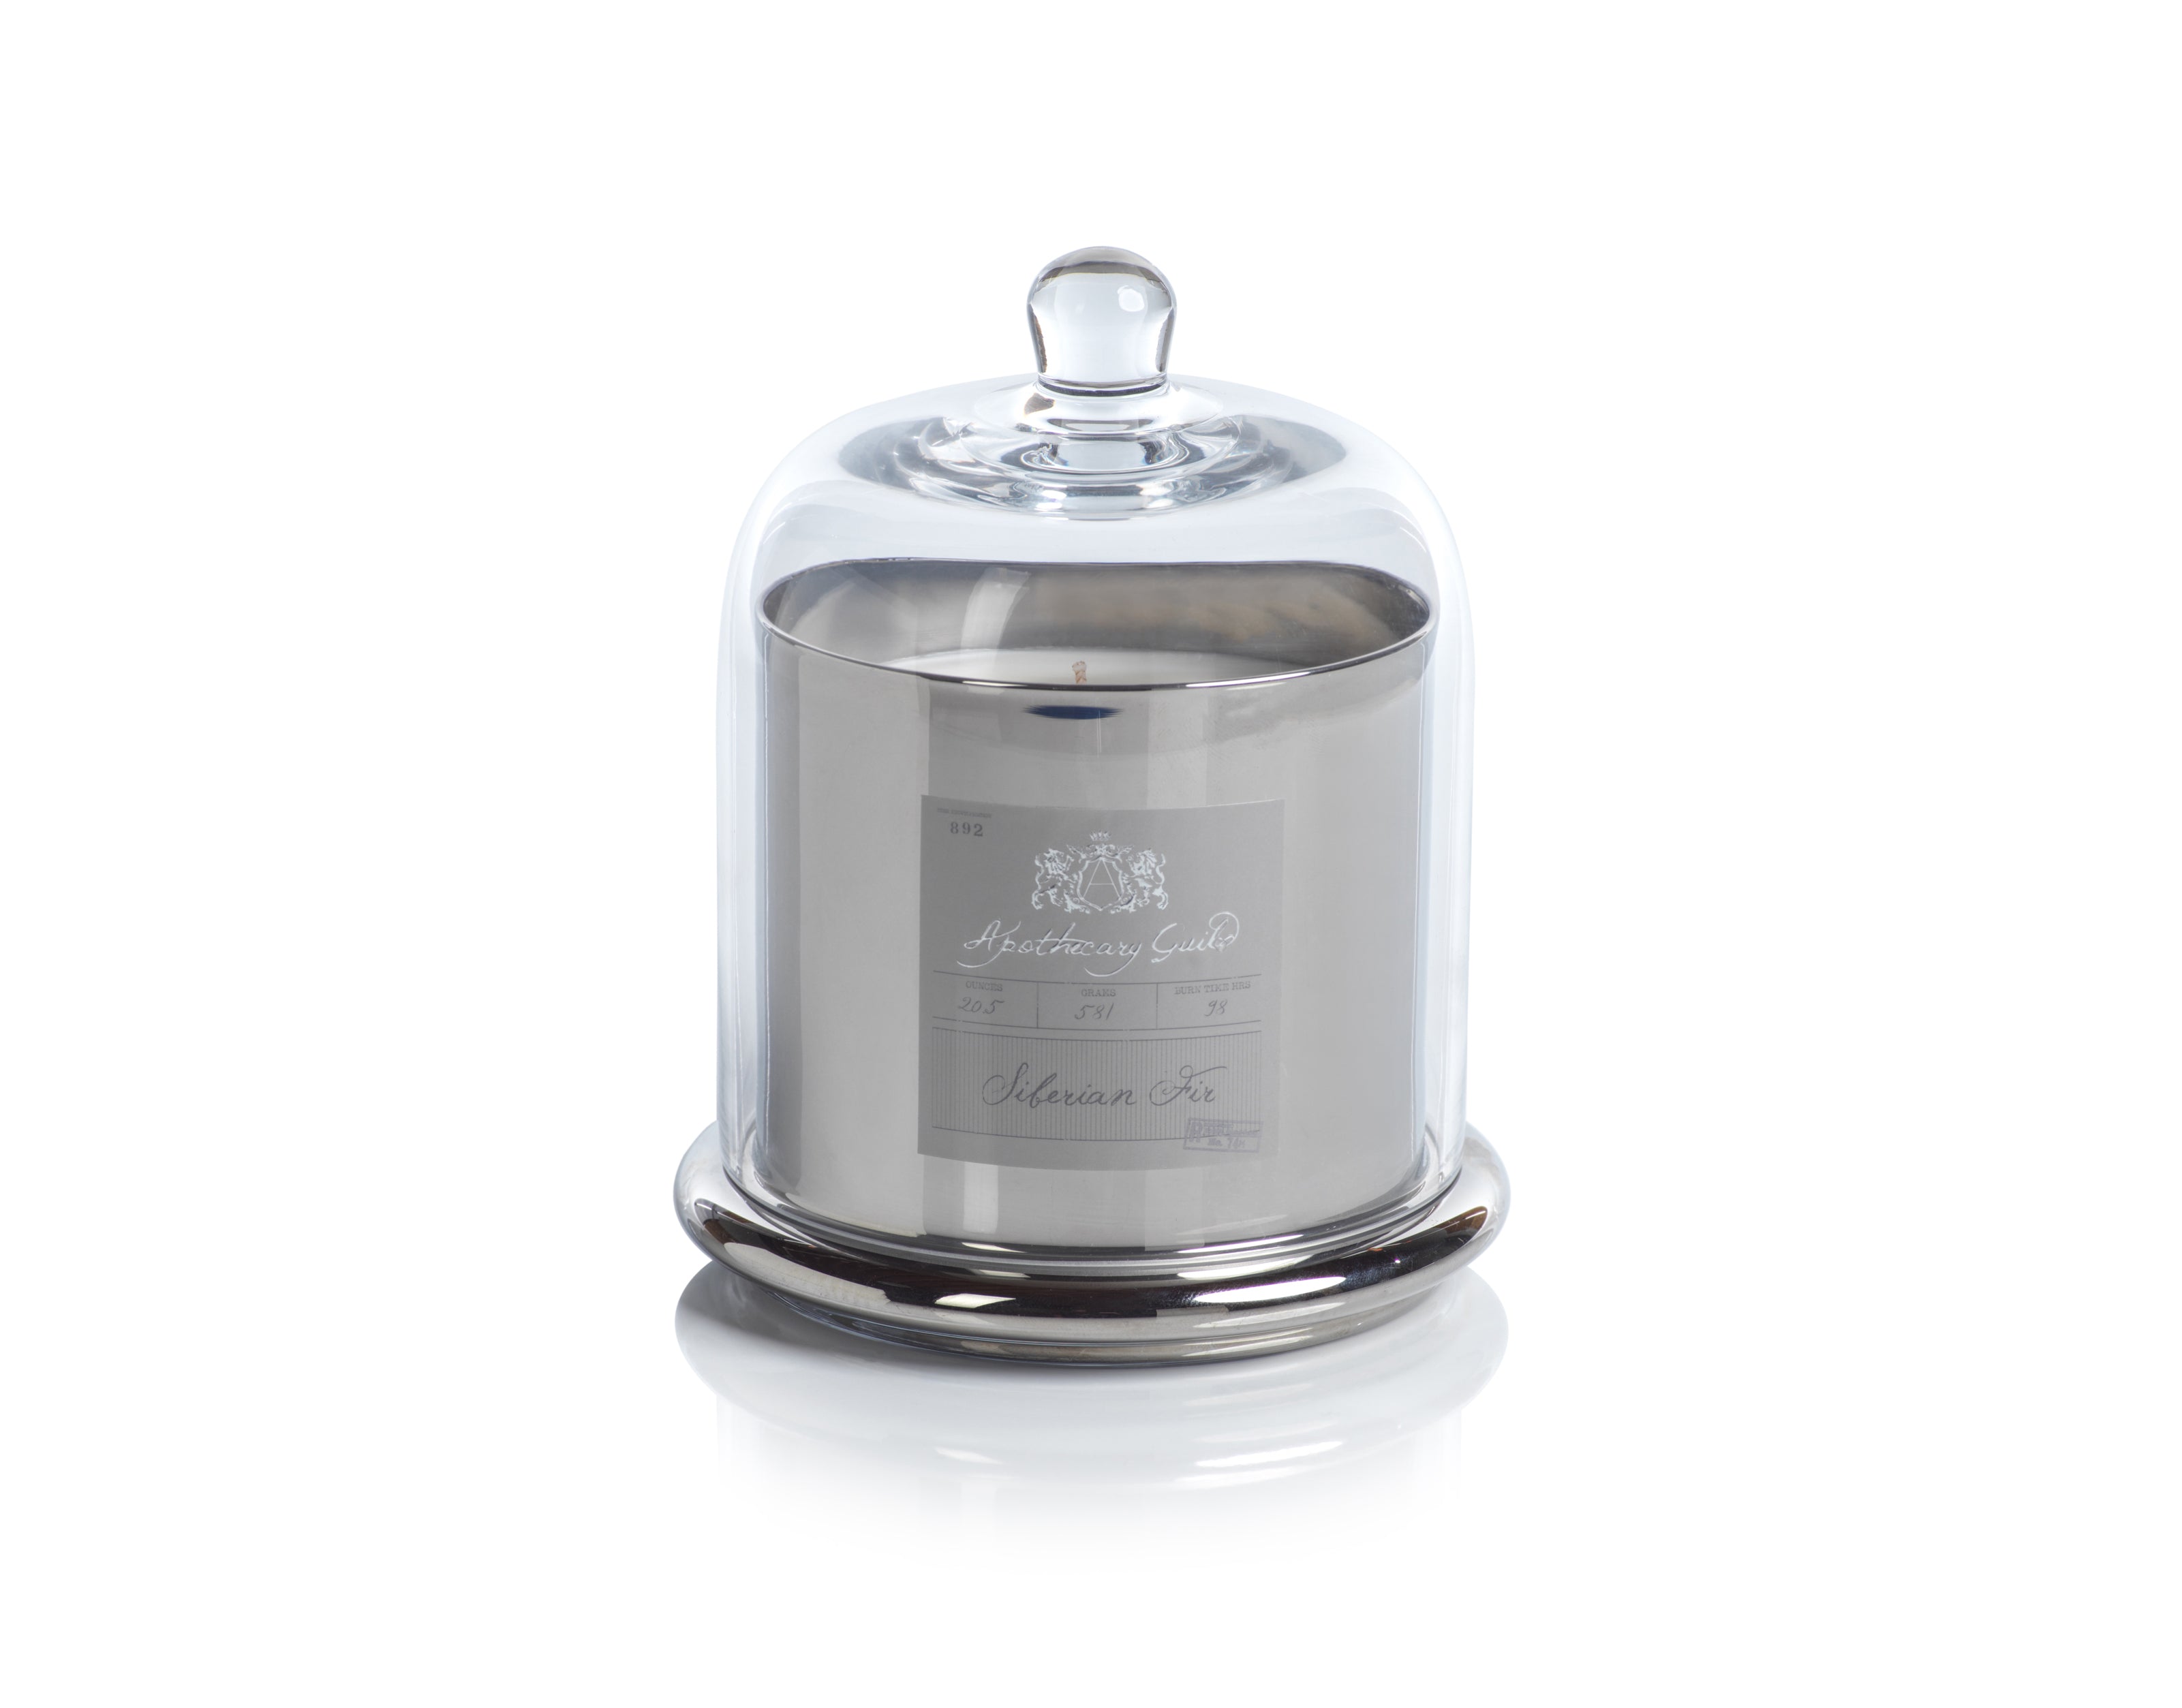 Apothecary Guild Domed Candle - Silver - Siberian Fir - CARLYLE AVENUE